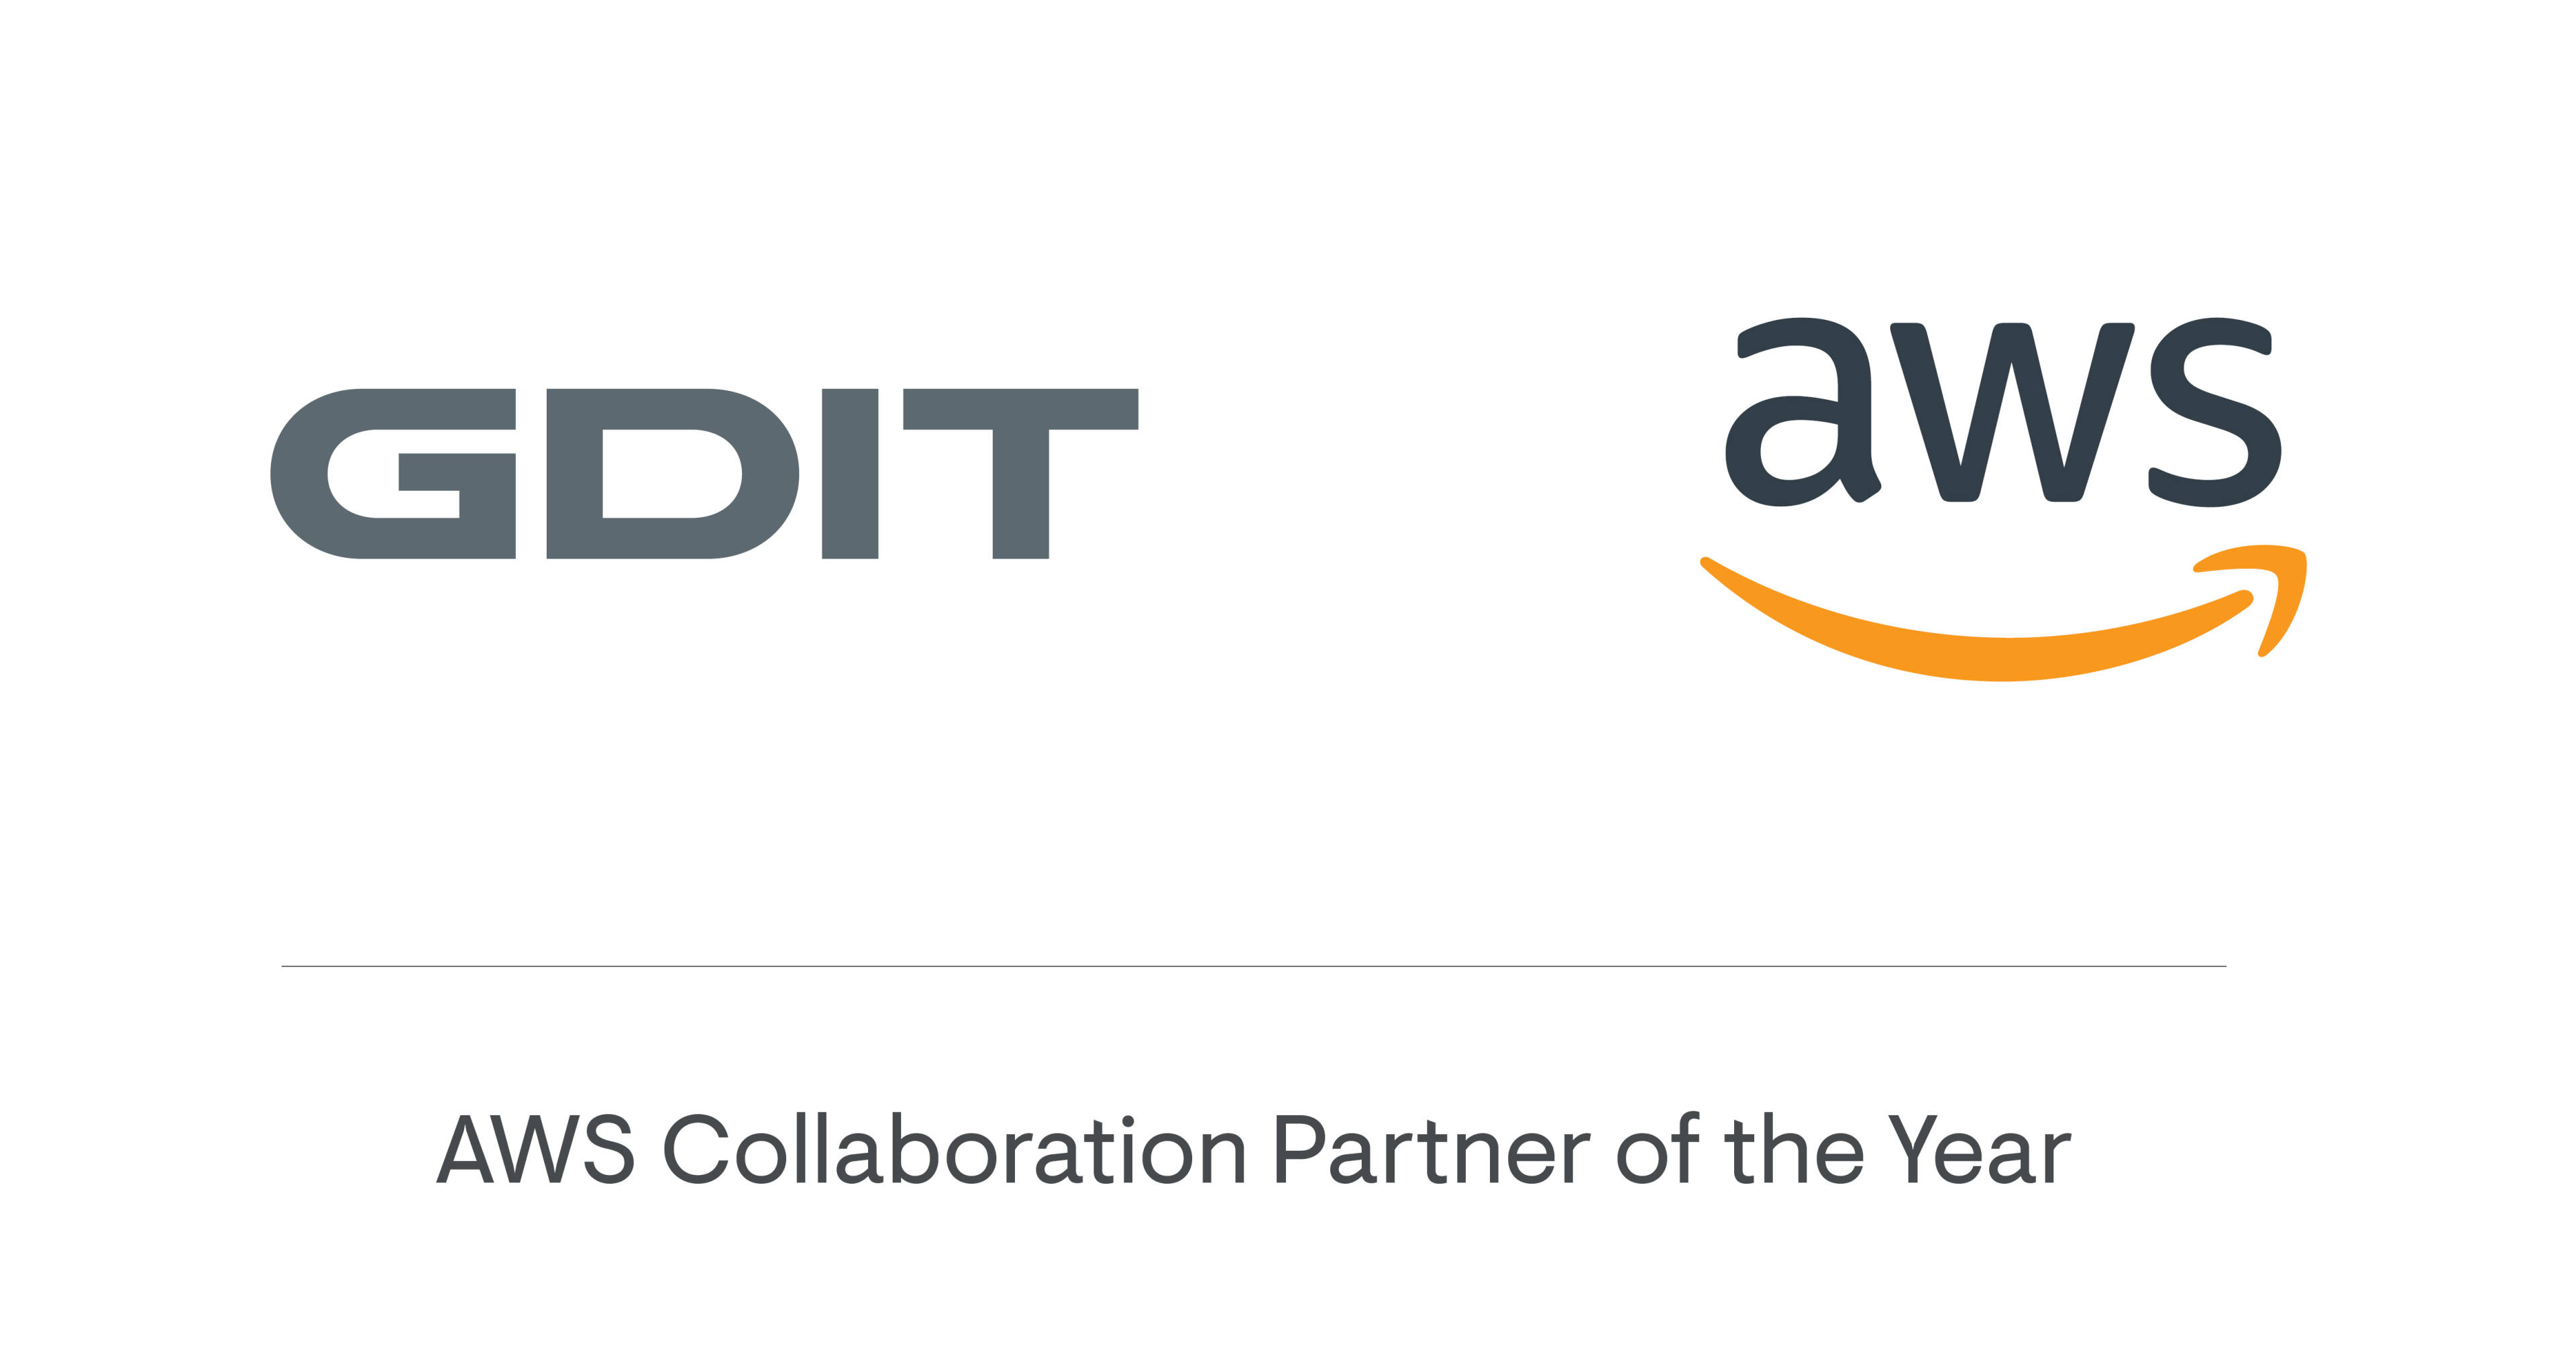 GDIT and AWS logos with text that reads "AWS Collaboration Partner of the Year"